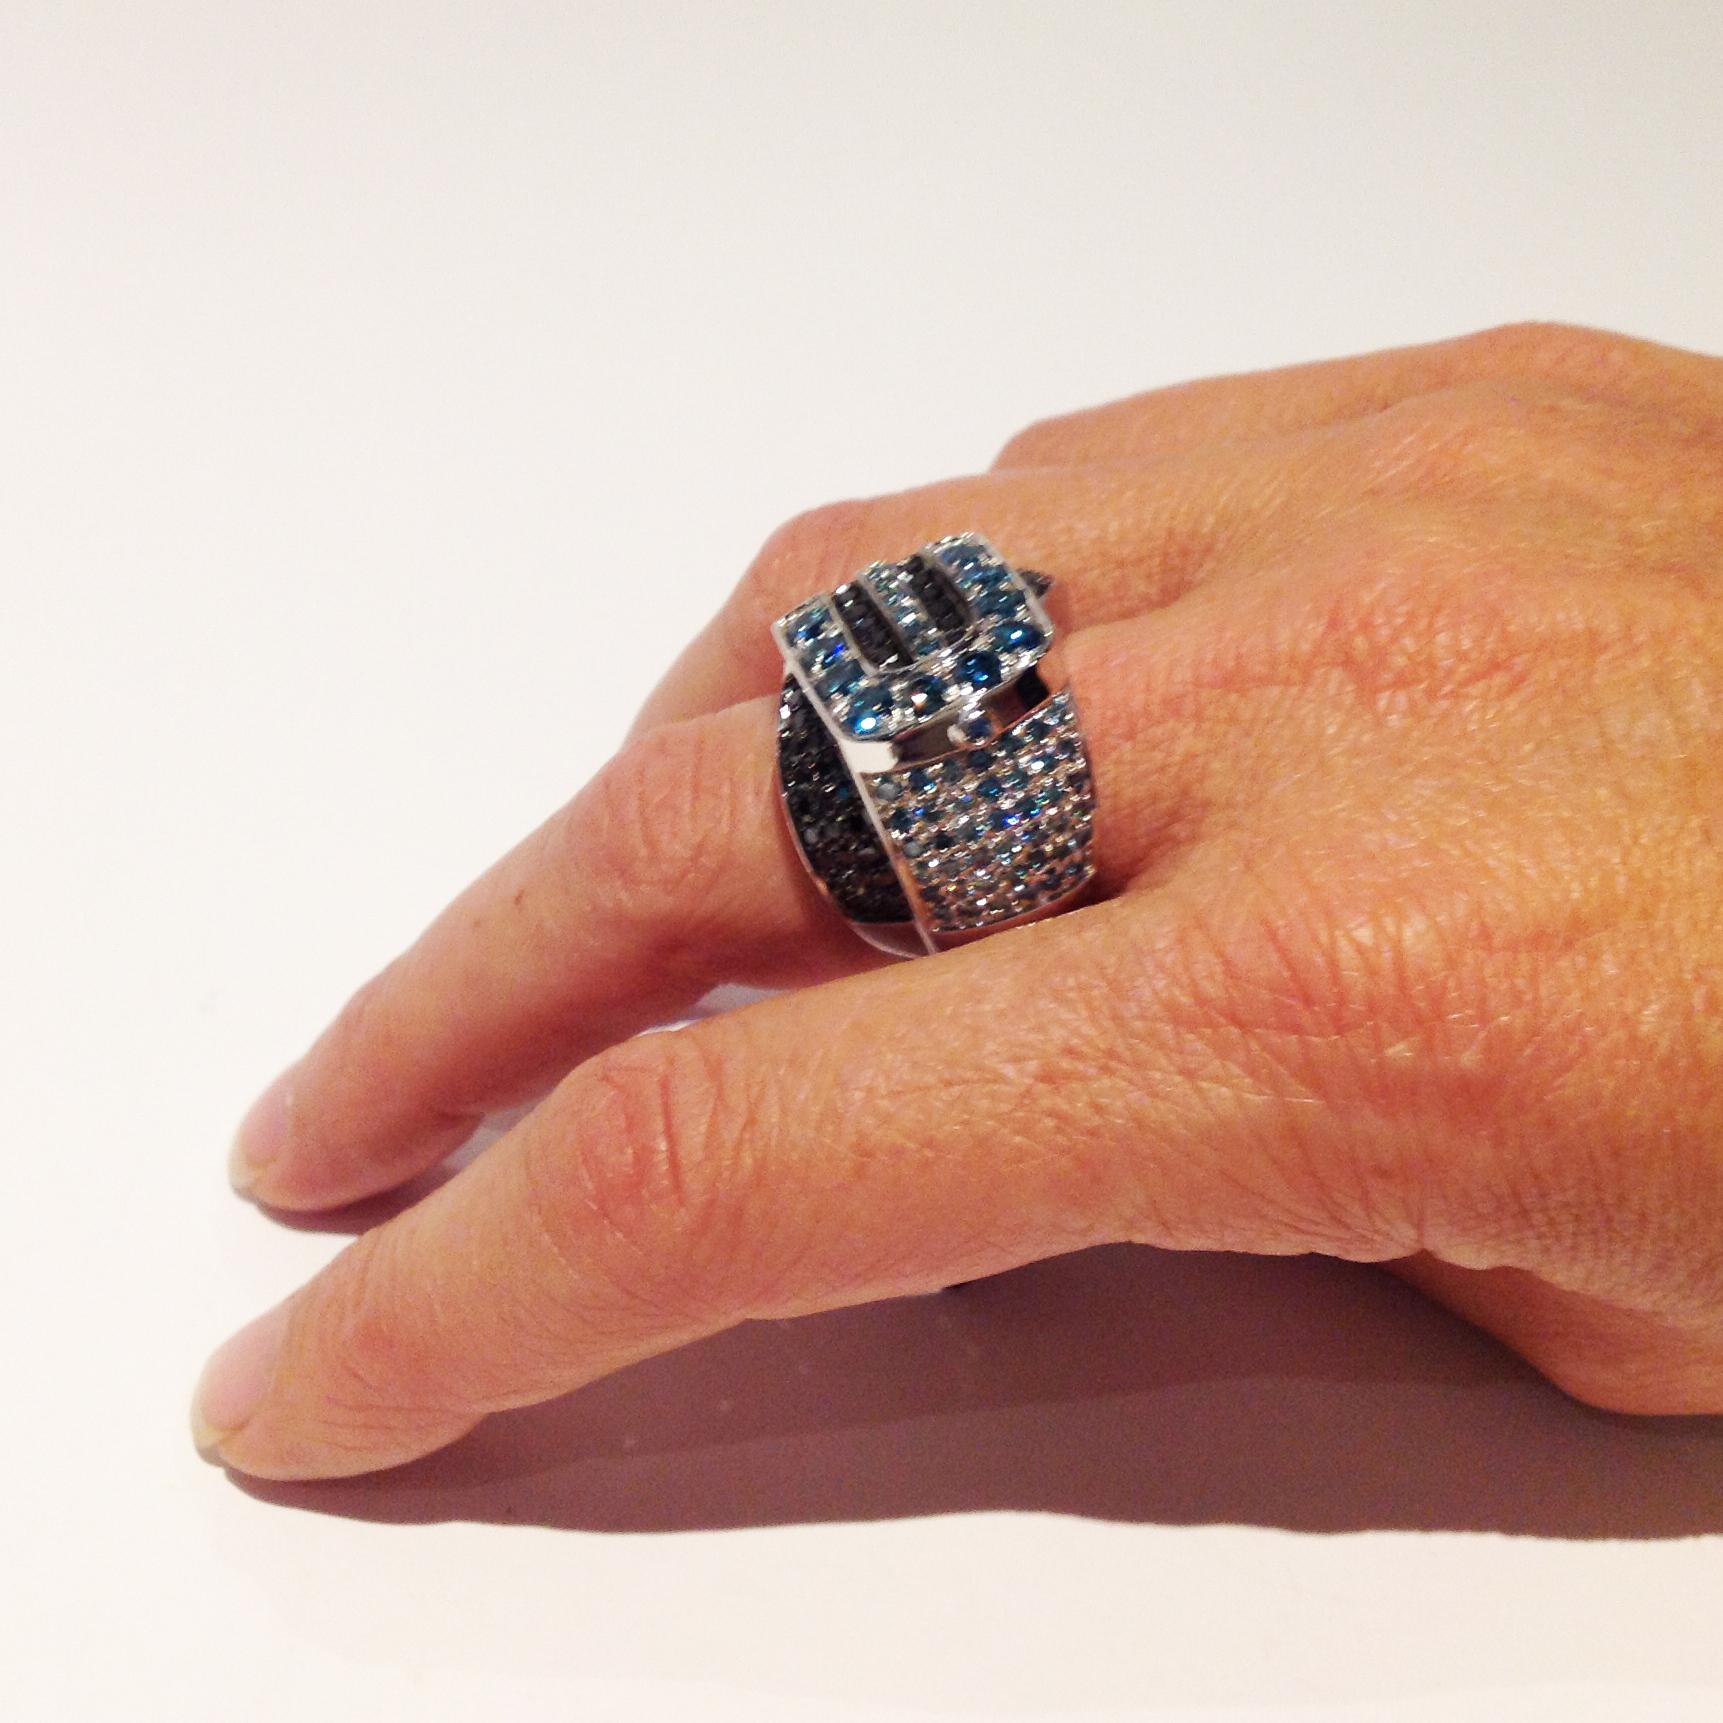 Paolo Piovan Black and Blue Diamonds 18 Karat White Gold Ring In New Condition For Sale In Padova, Padova